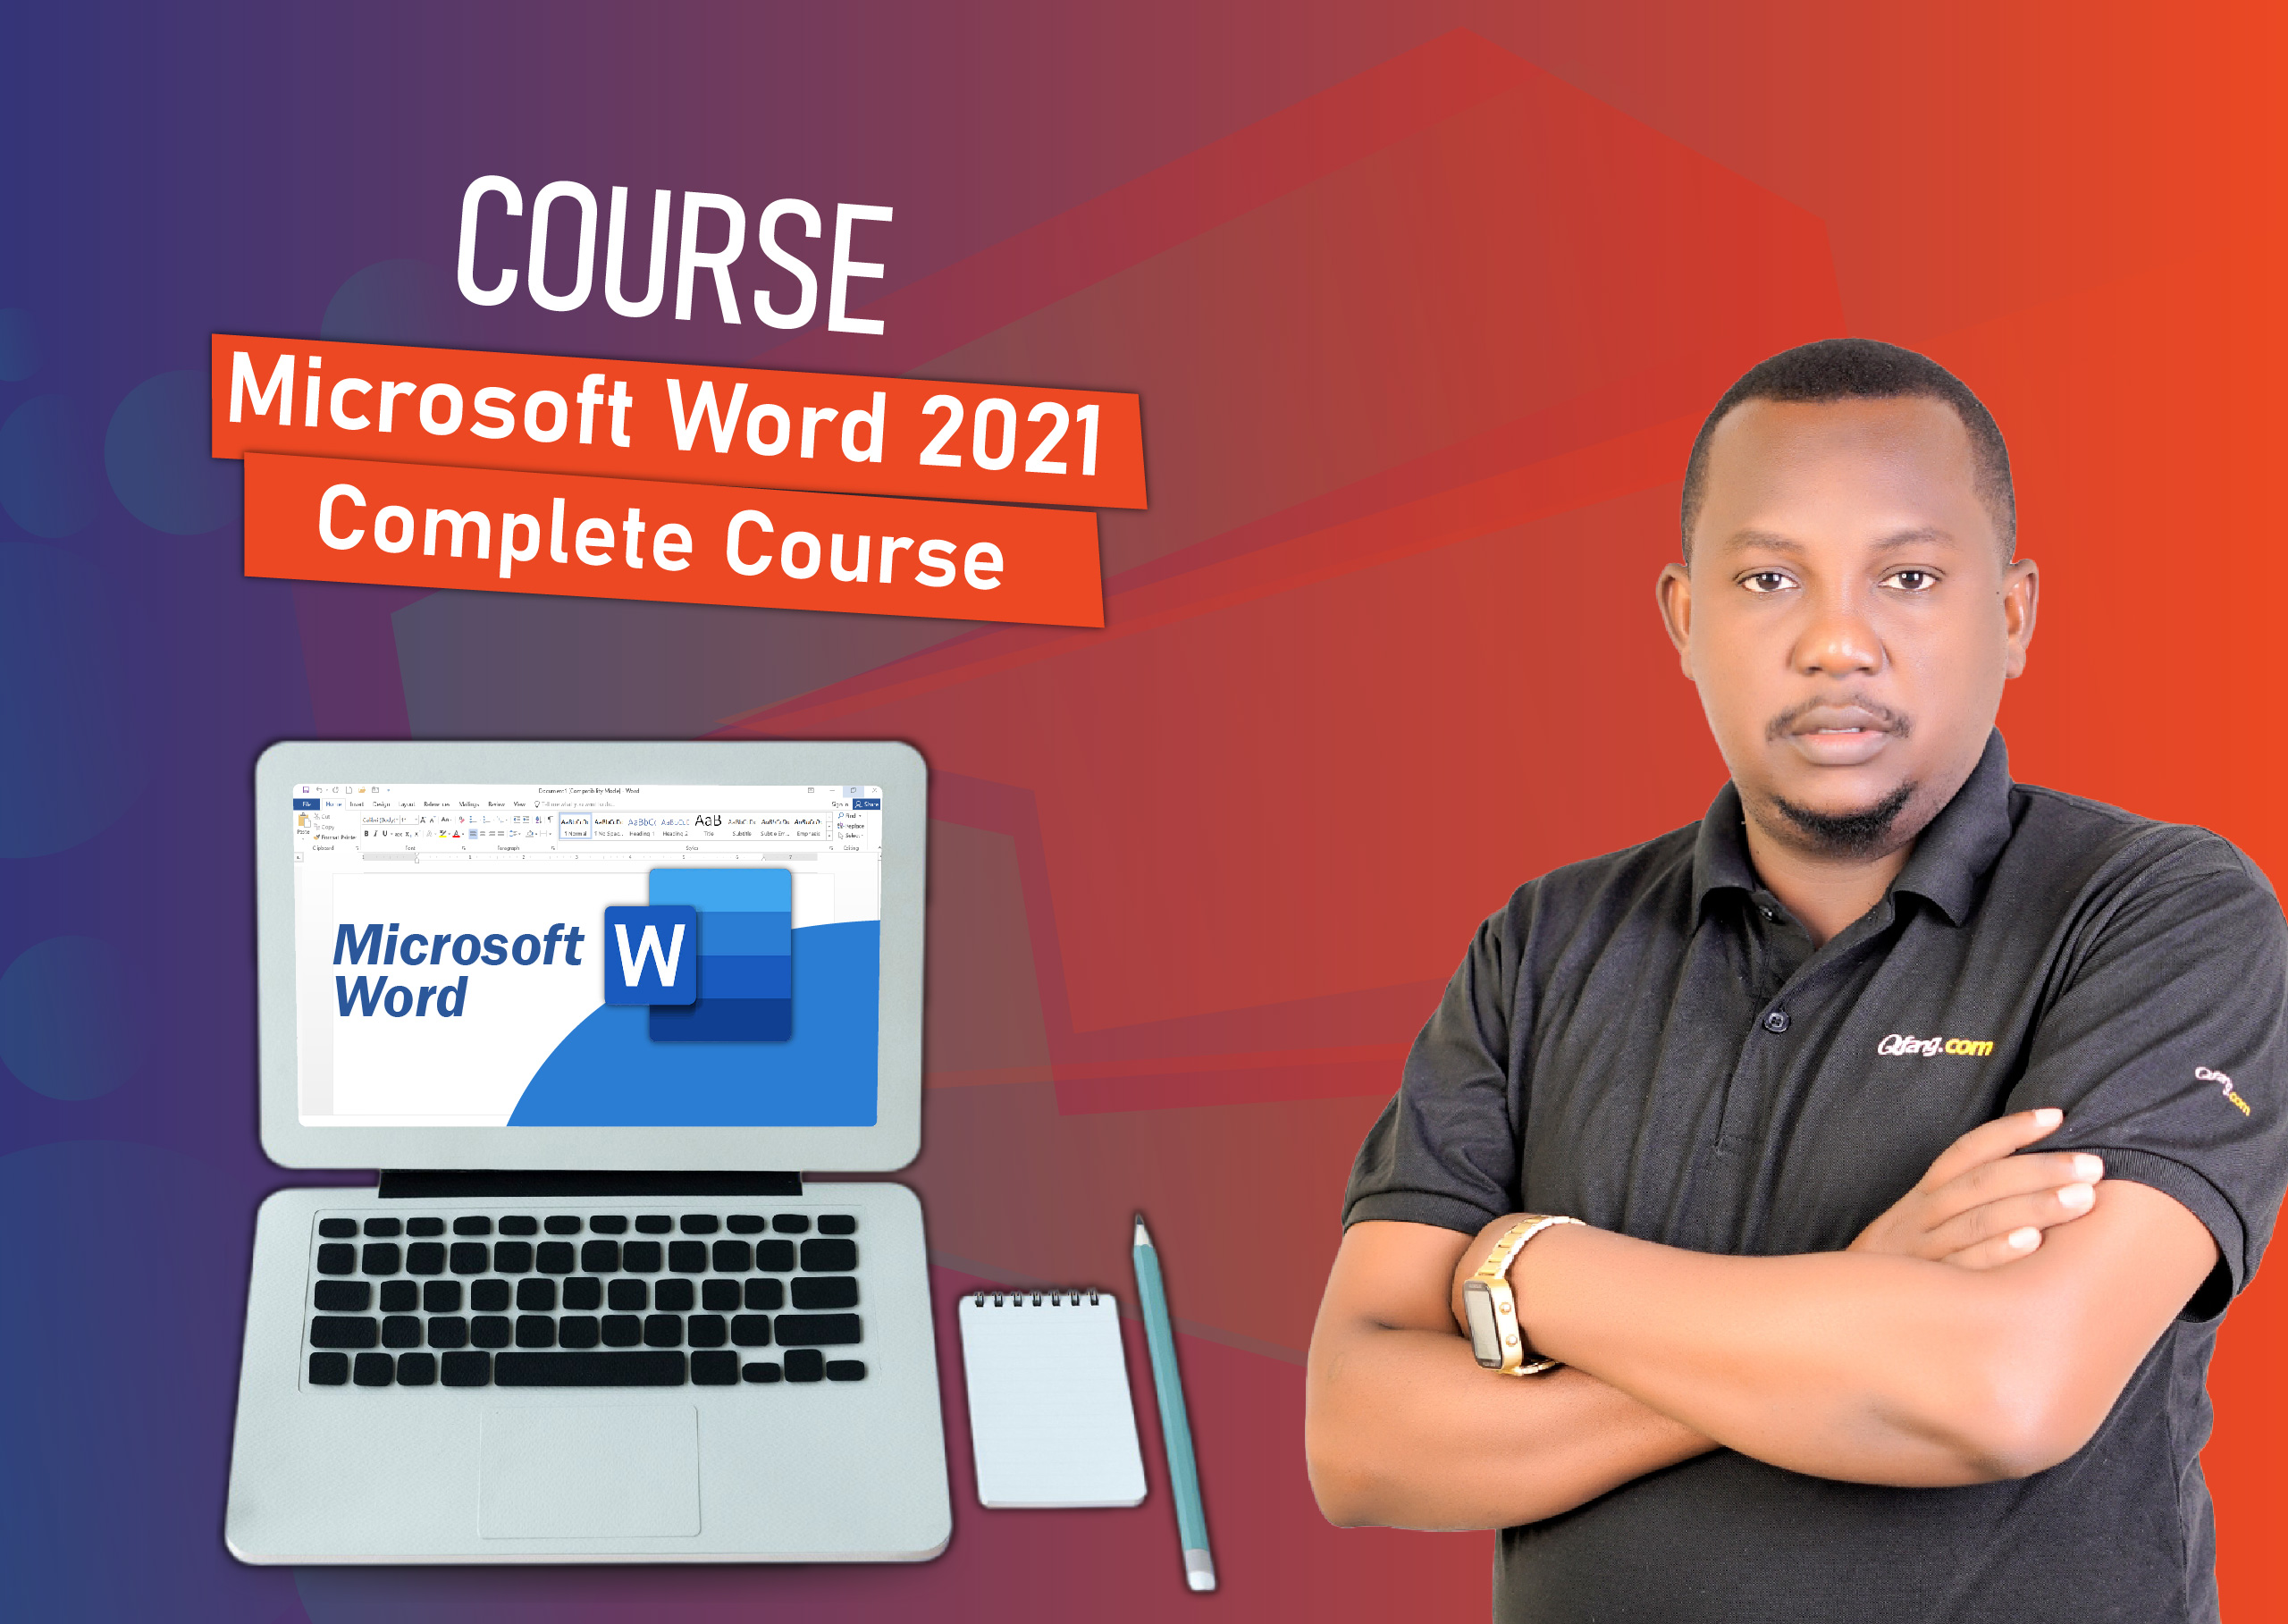 Microsoft Word 2021 Complete Course